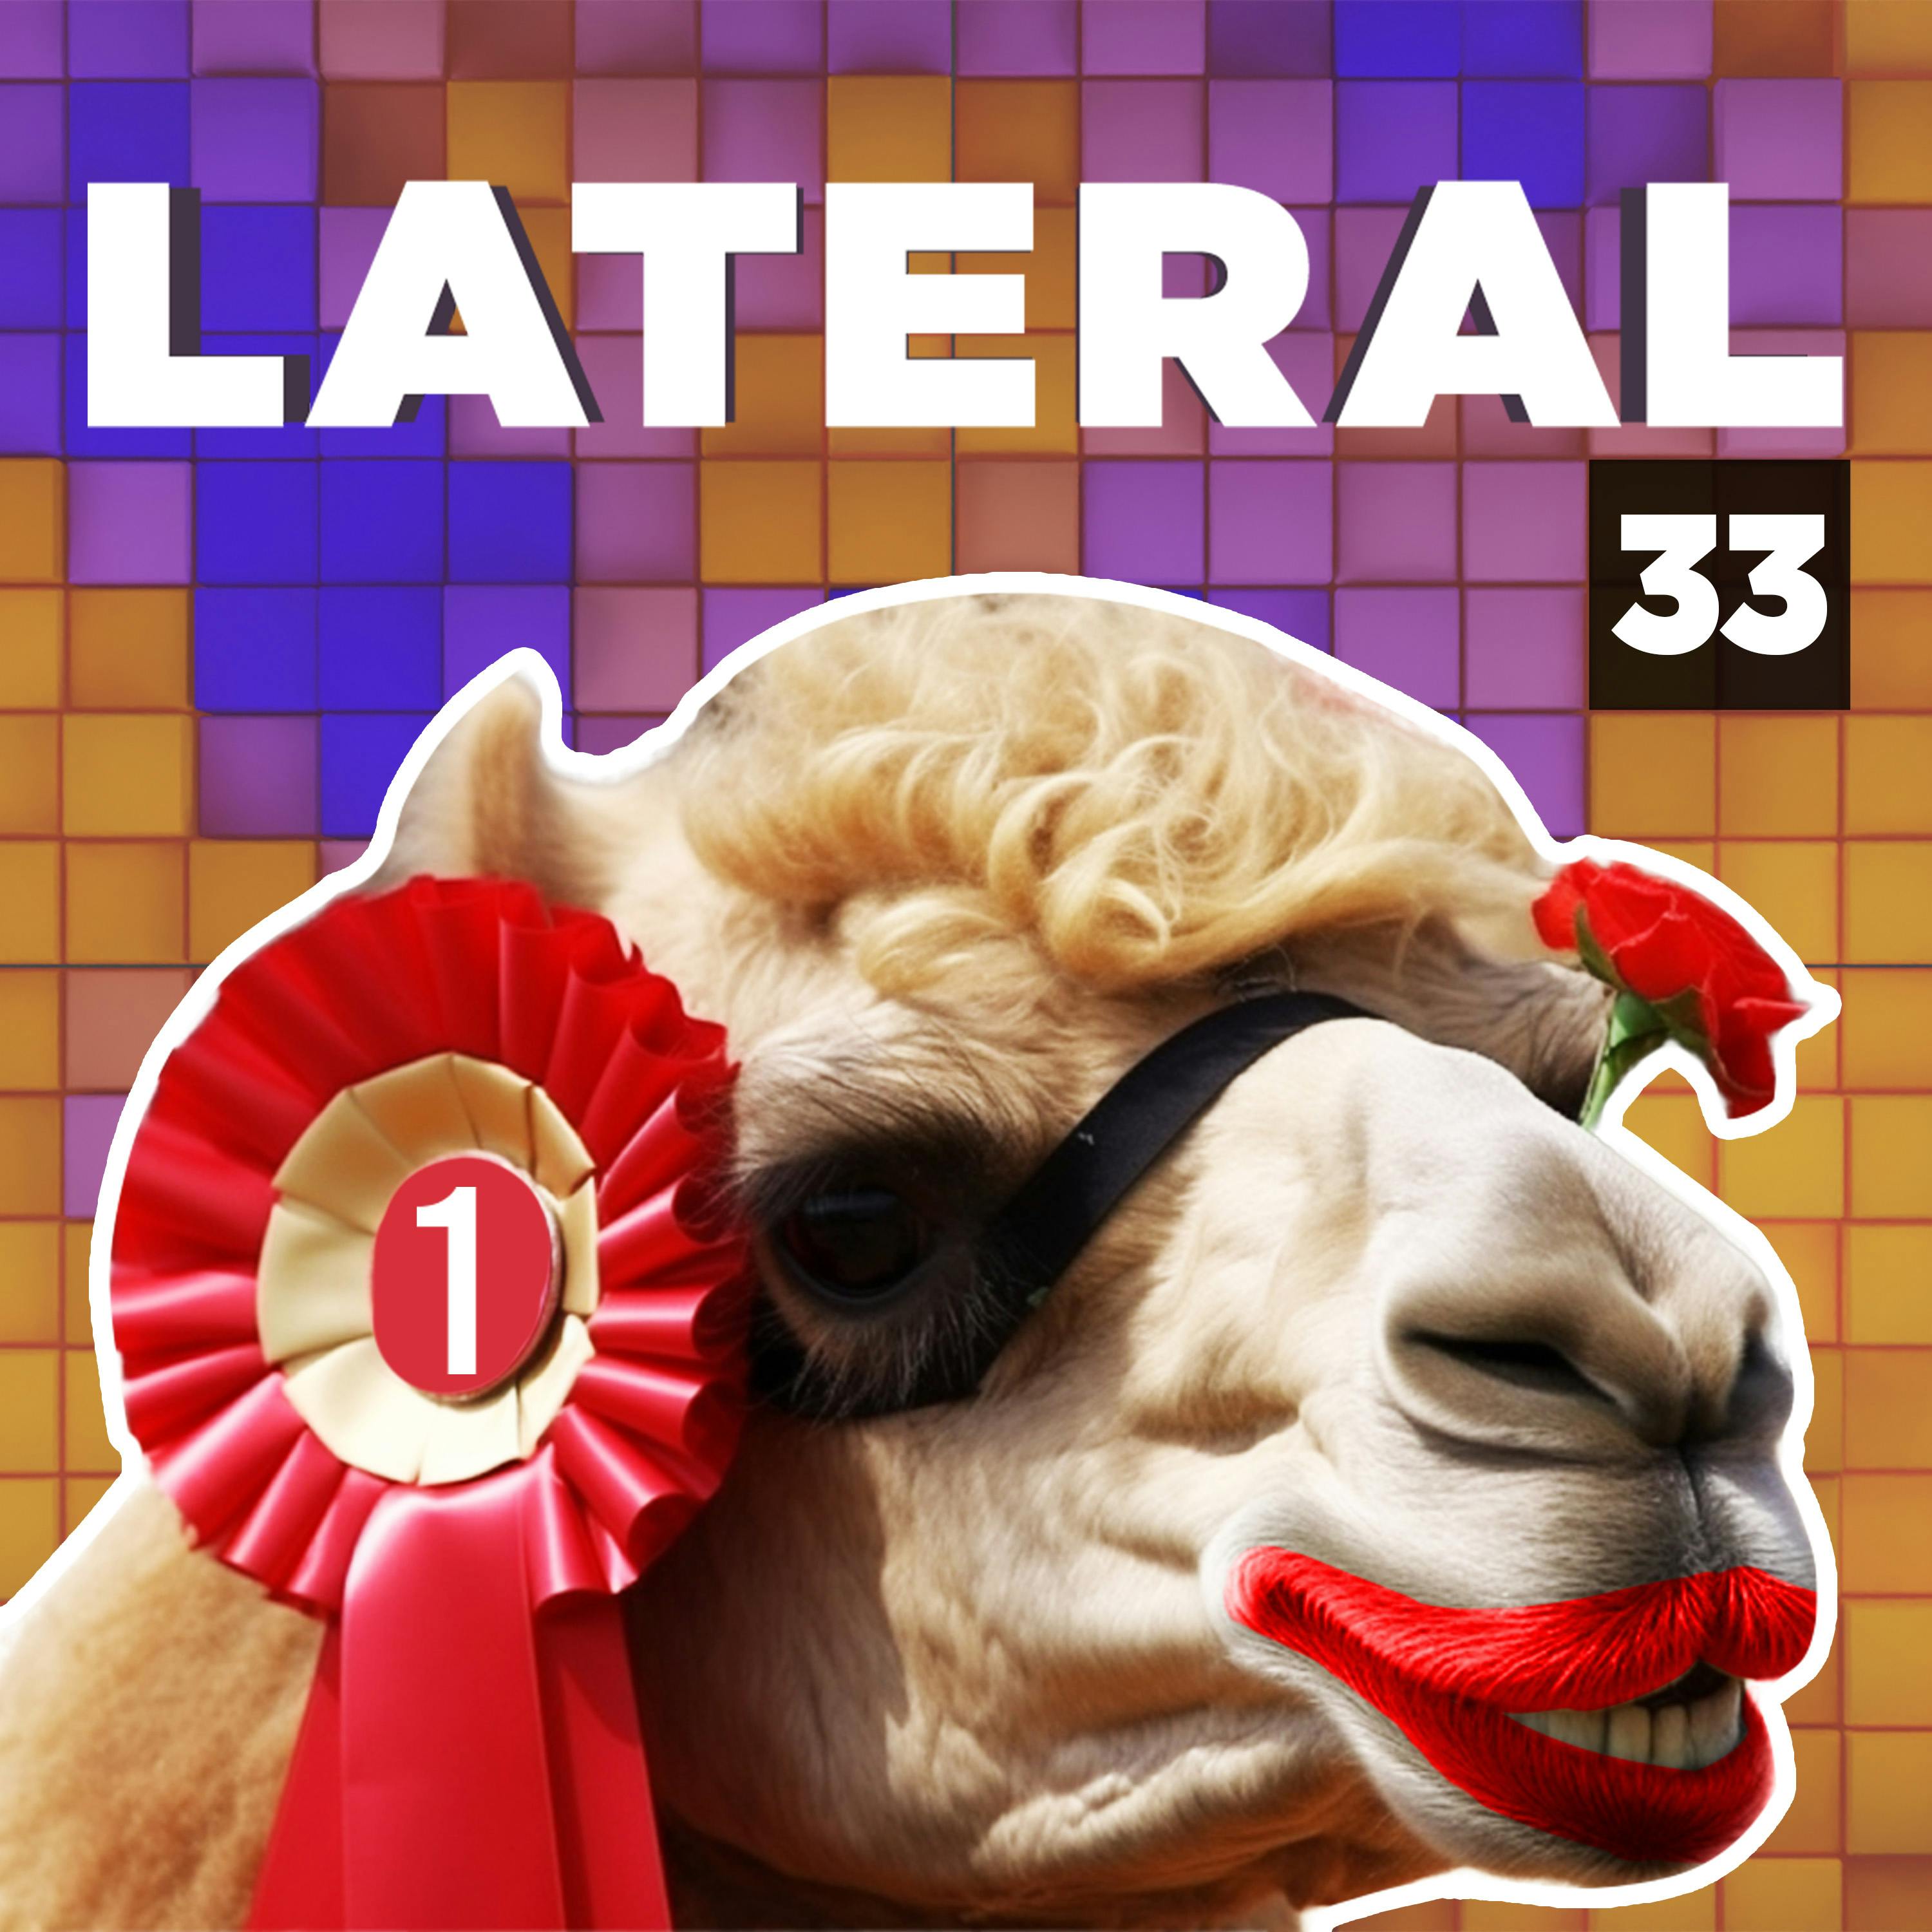 33: Crooked camel competitions